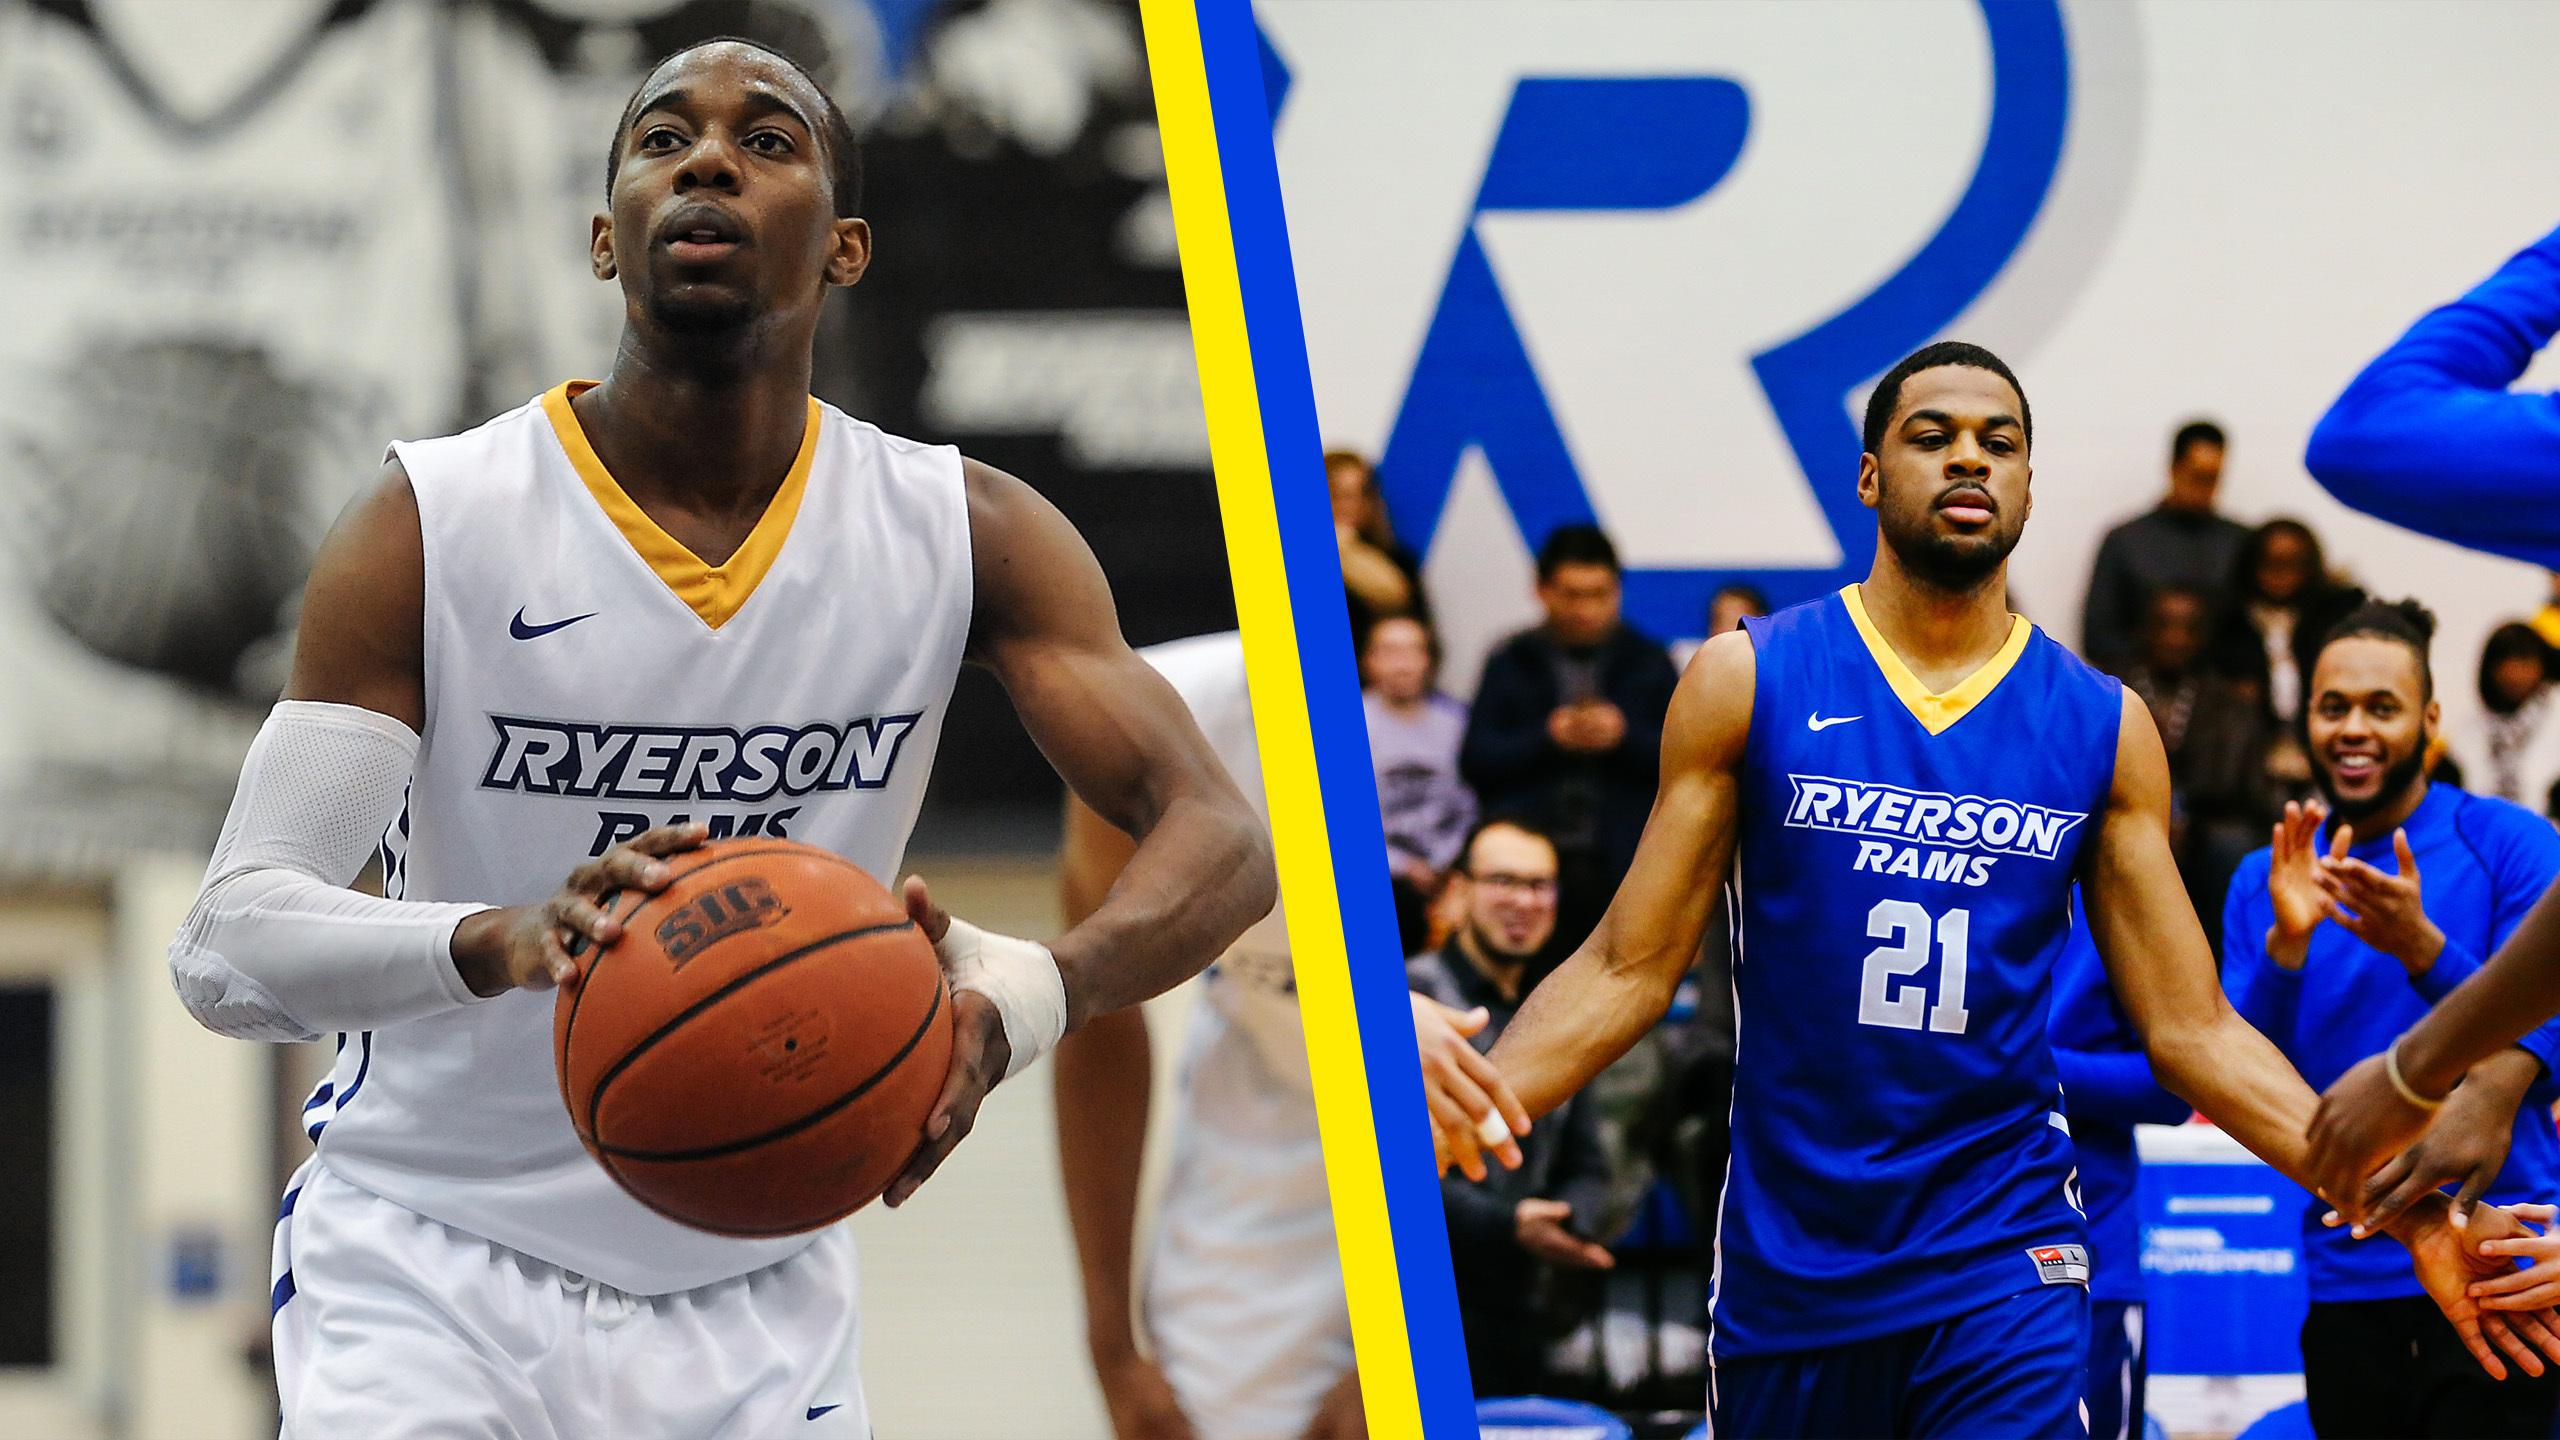 A Rams men's basketball player in a white jersey and Rams men's basketball player in a blue jersey